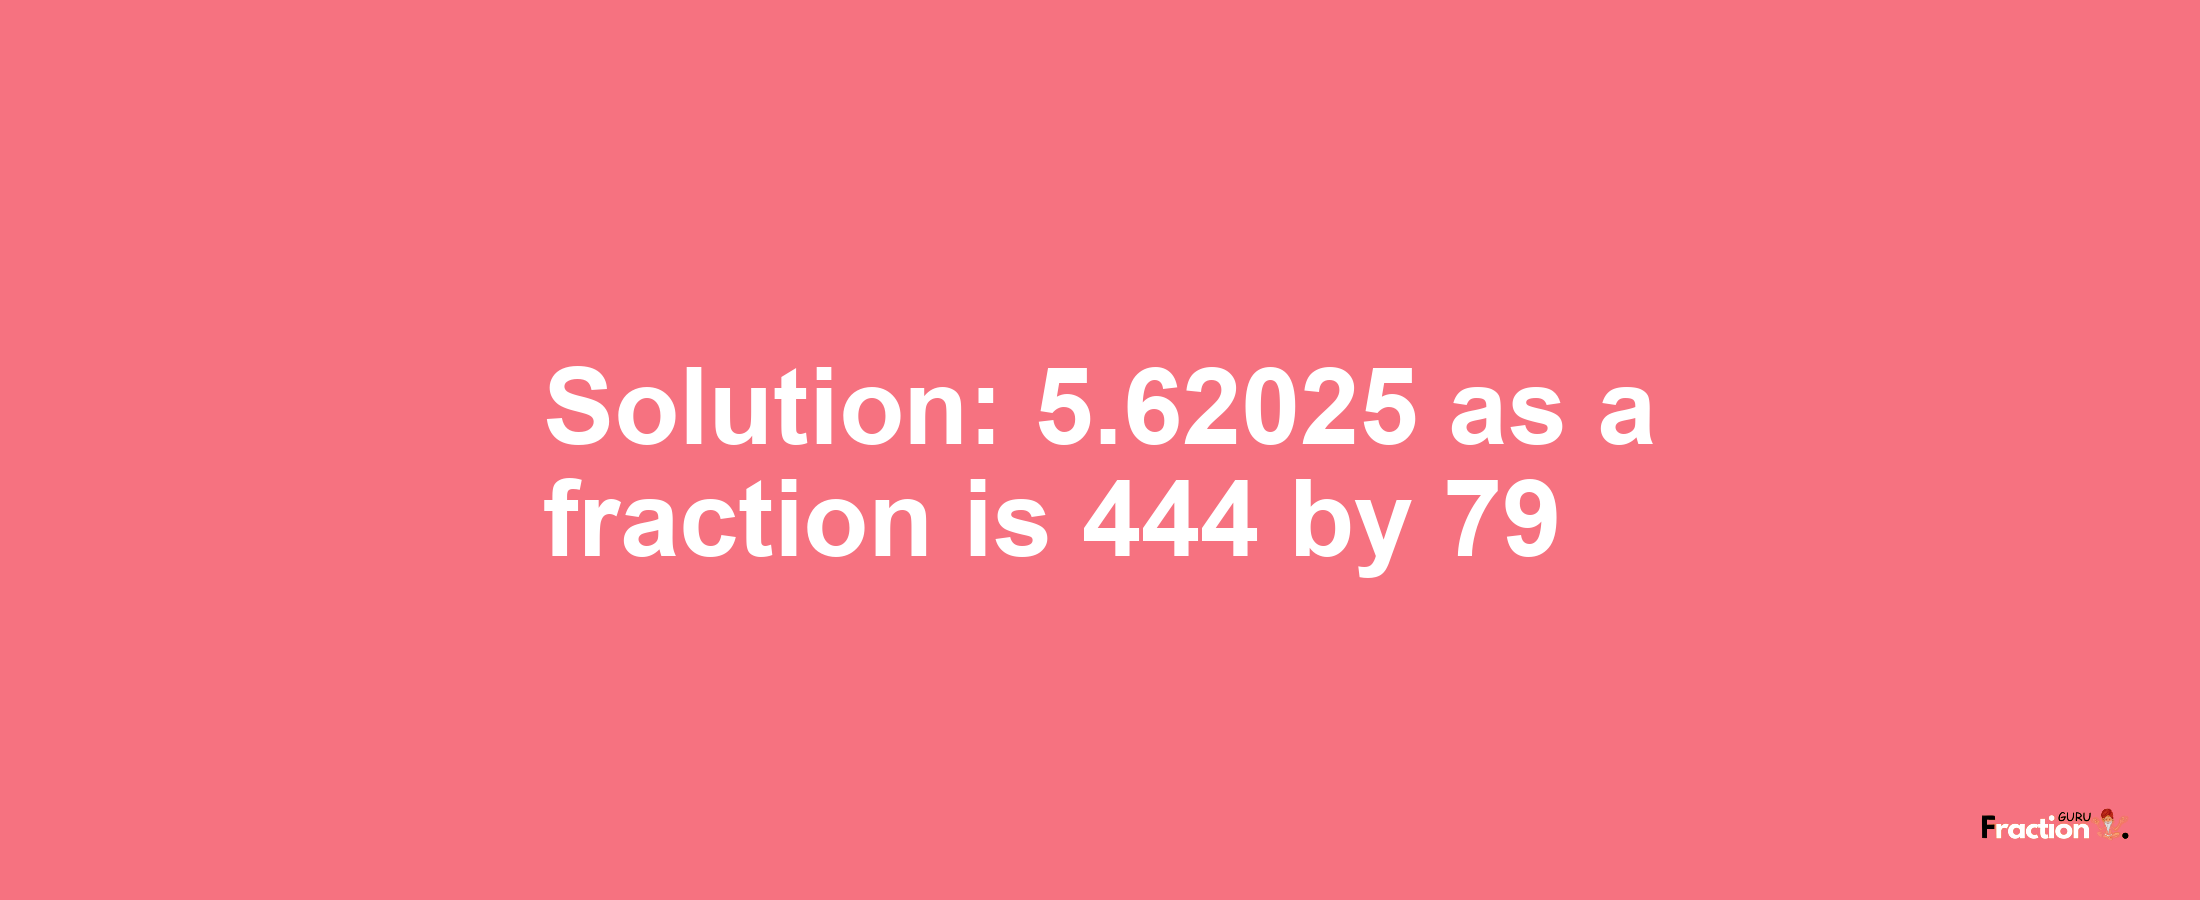 Solution:5.62025 as a fraction is 444/79